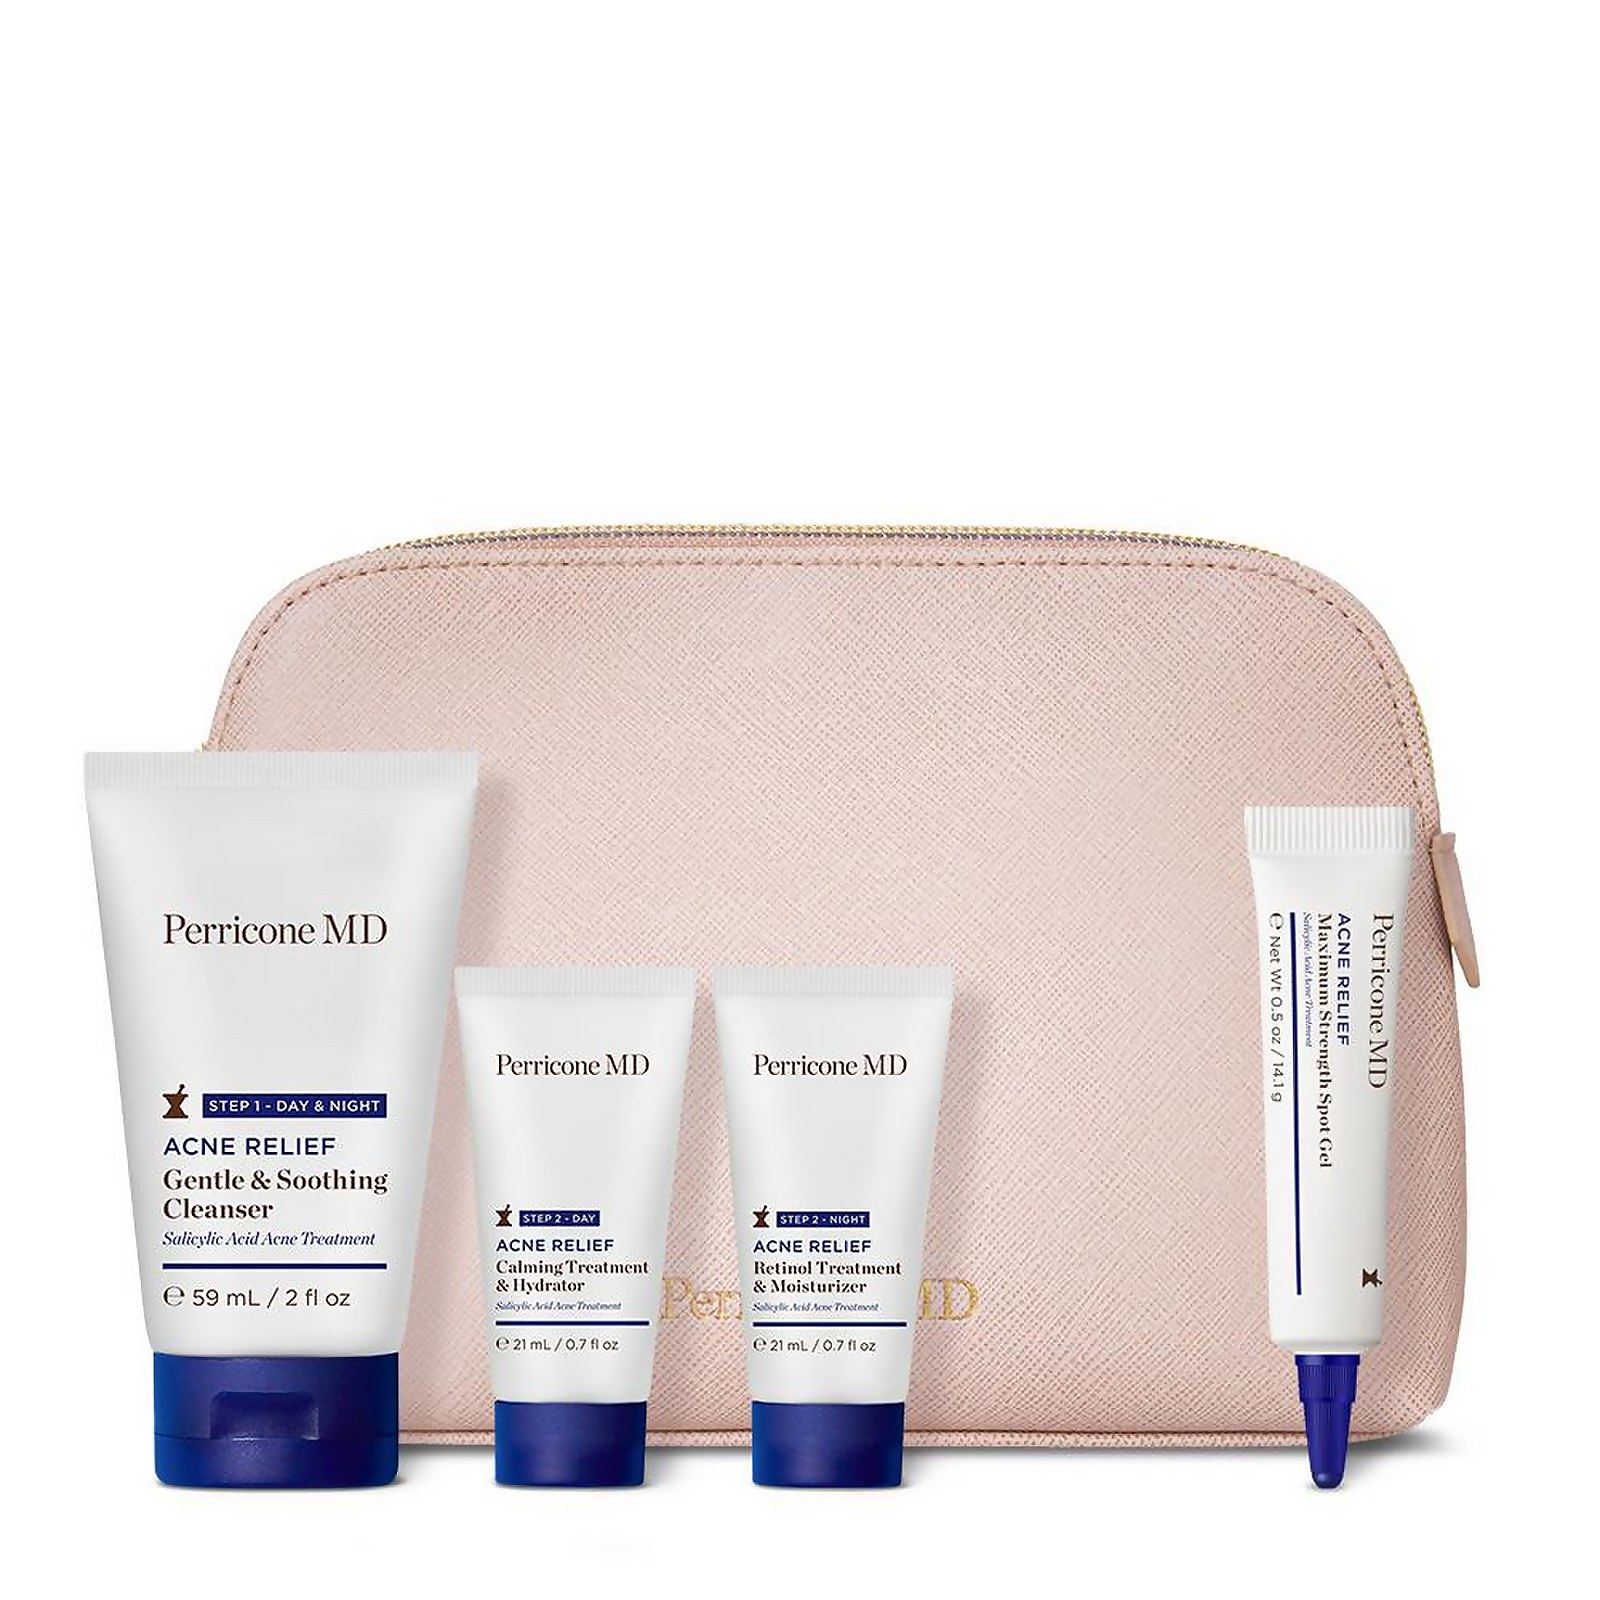 Perricone Md On-the-go Acne Relief Essentials